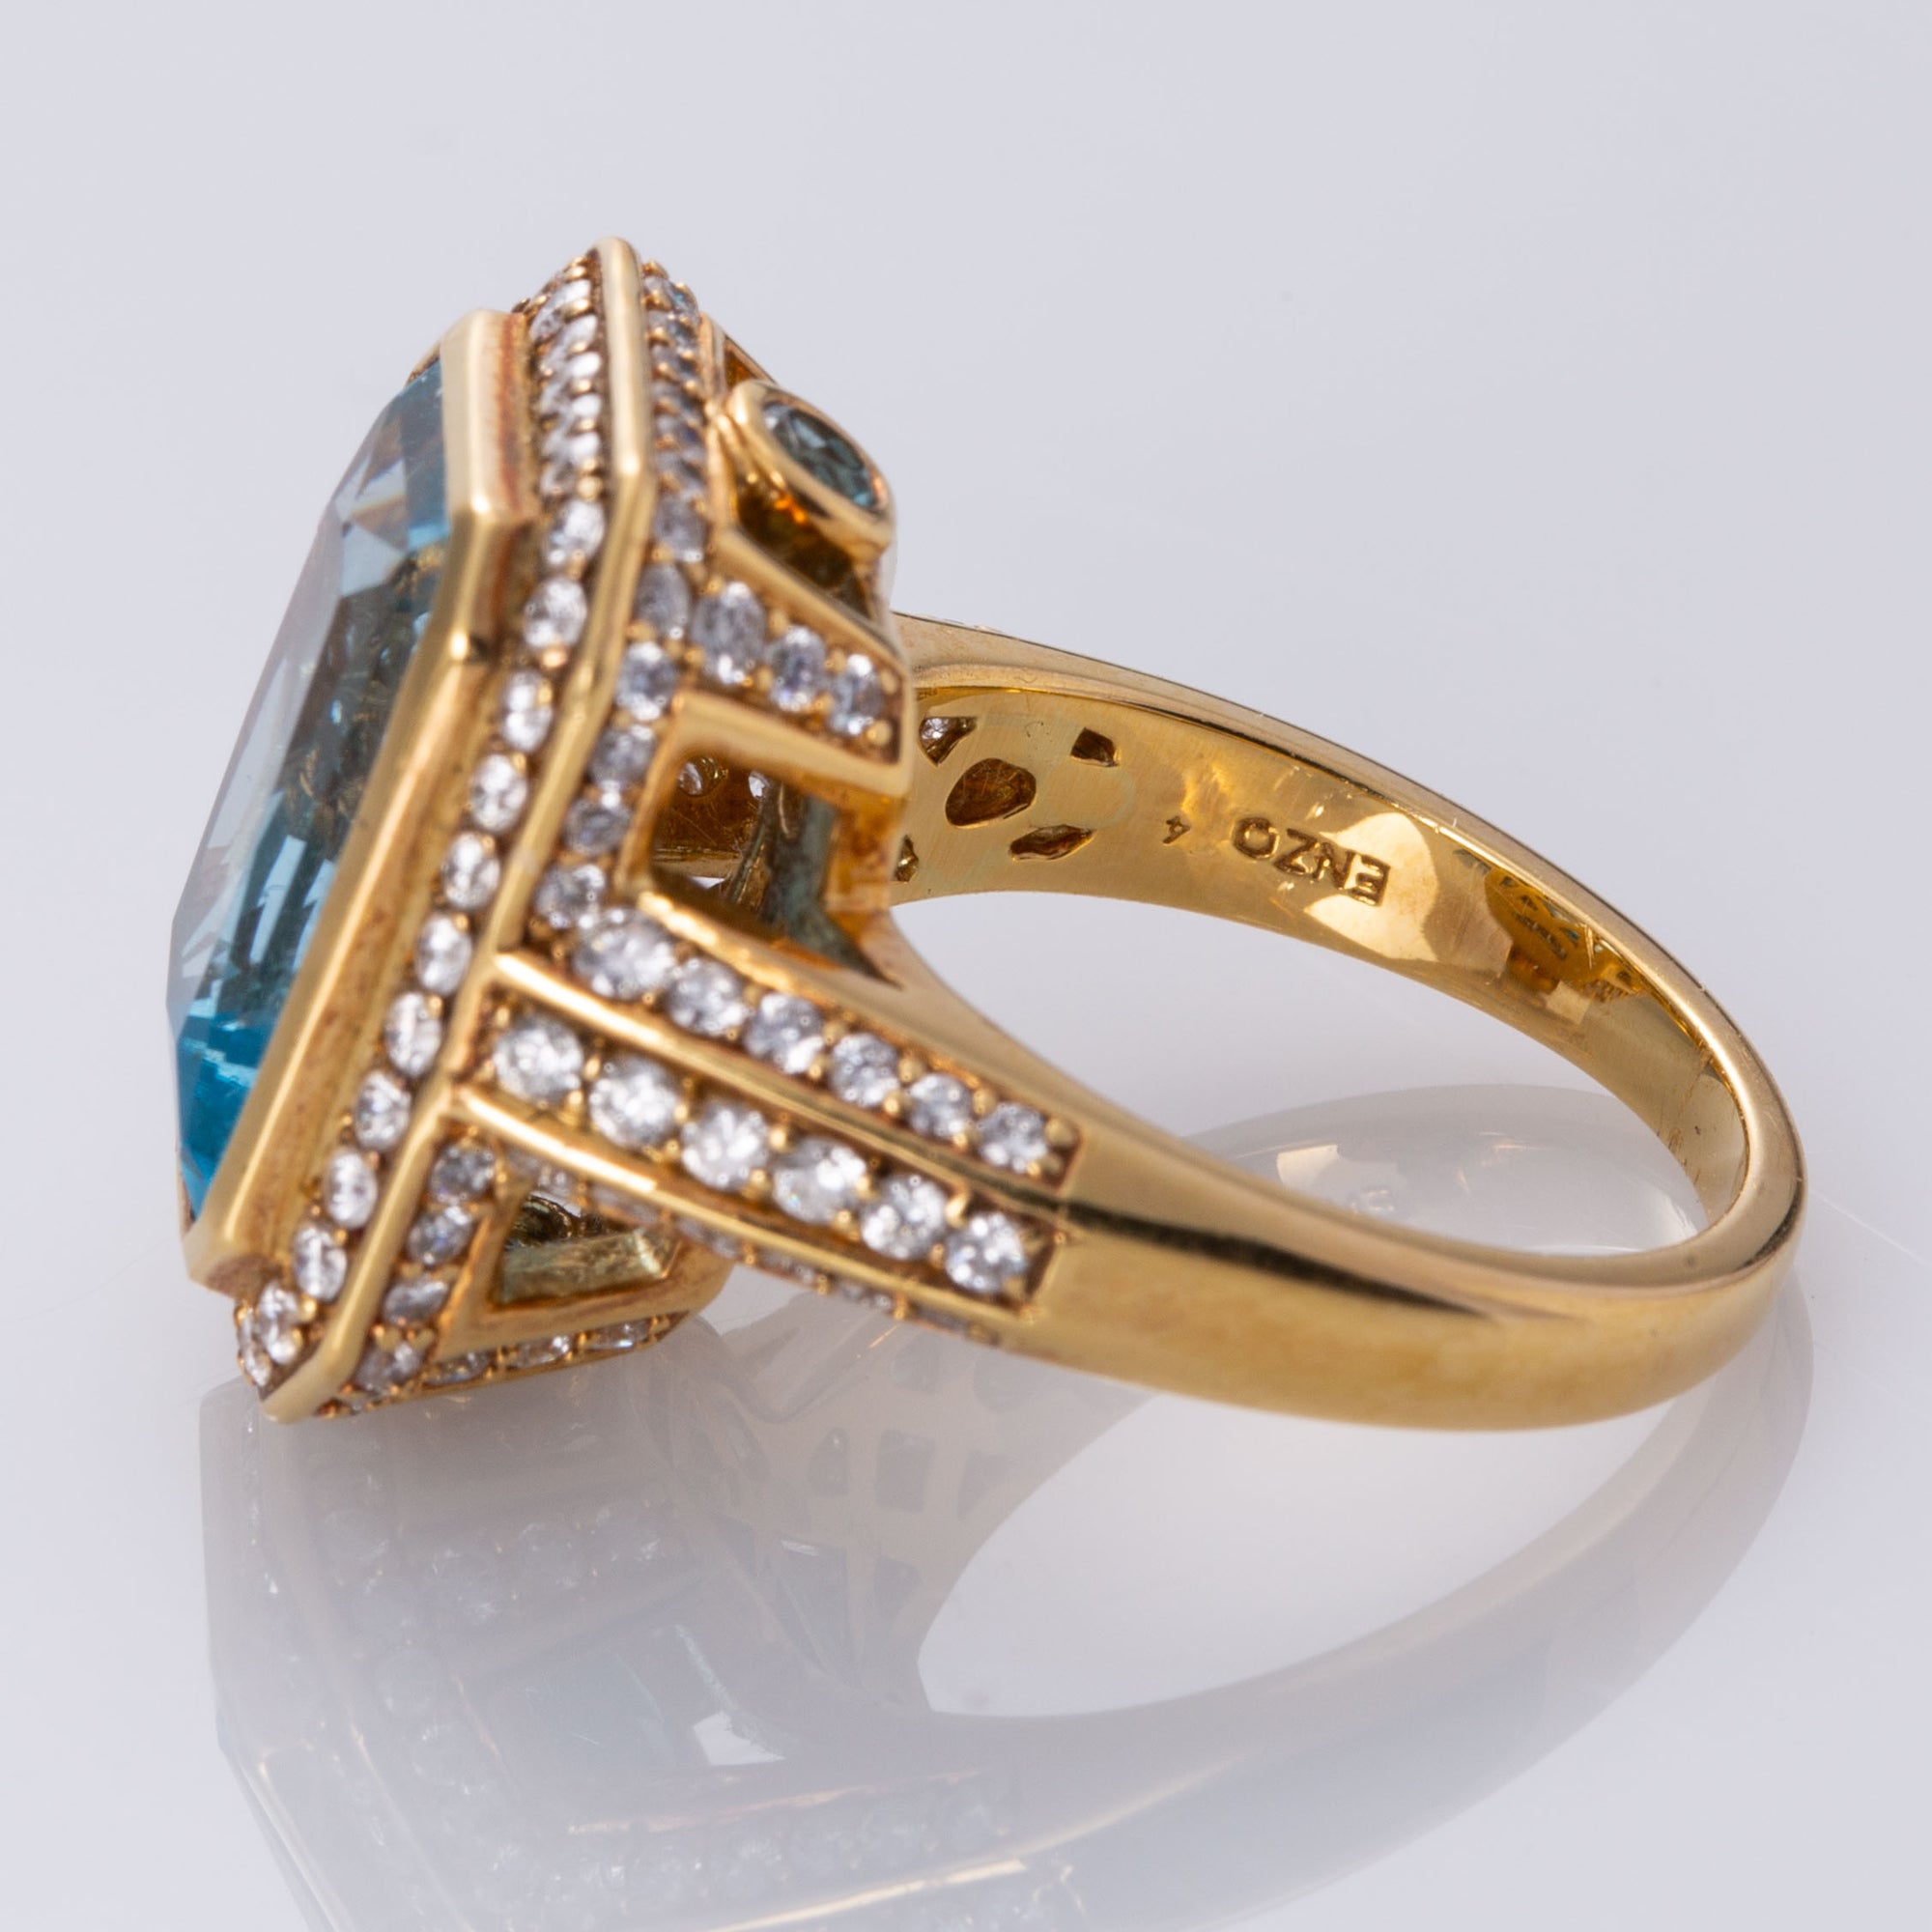 18K Yellow Gold Blue Topaz and Diamond Cocktail Ring | 8.18 ctw, 1.16 ctw | SZ 6 |